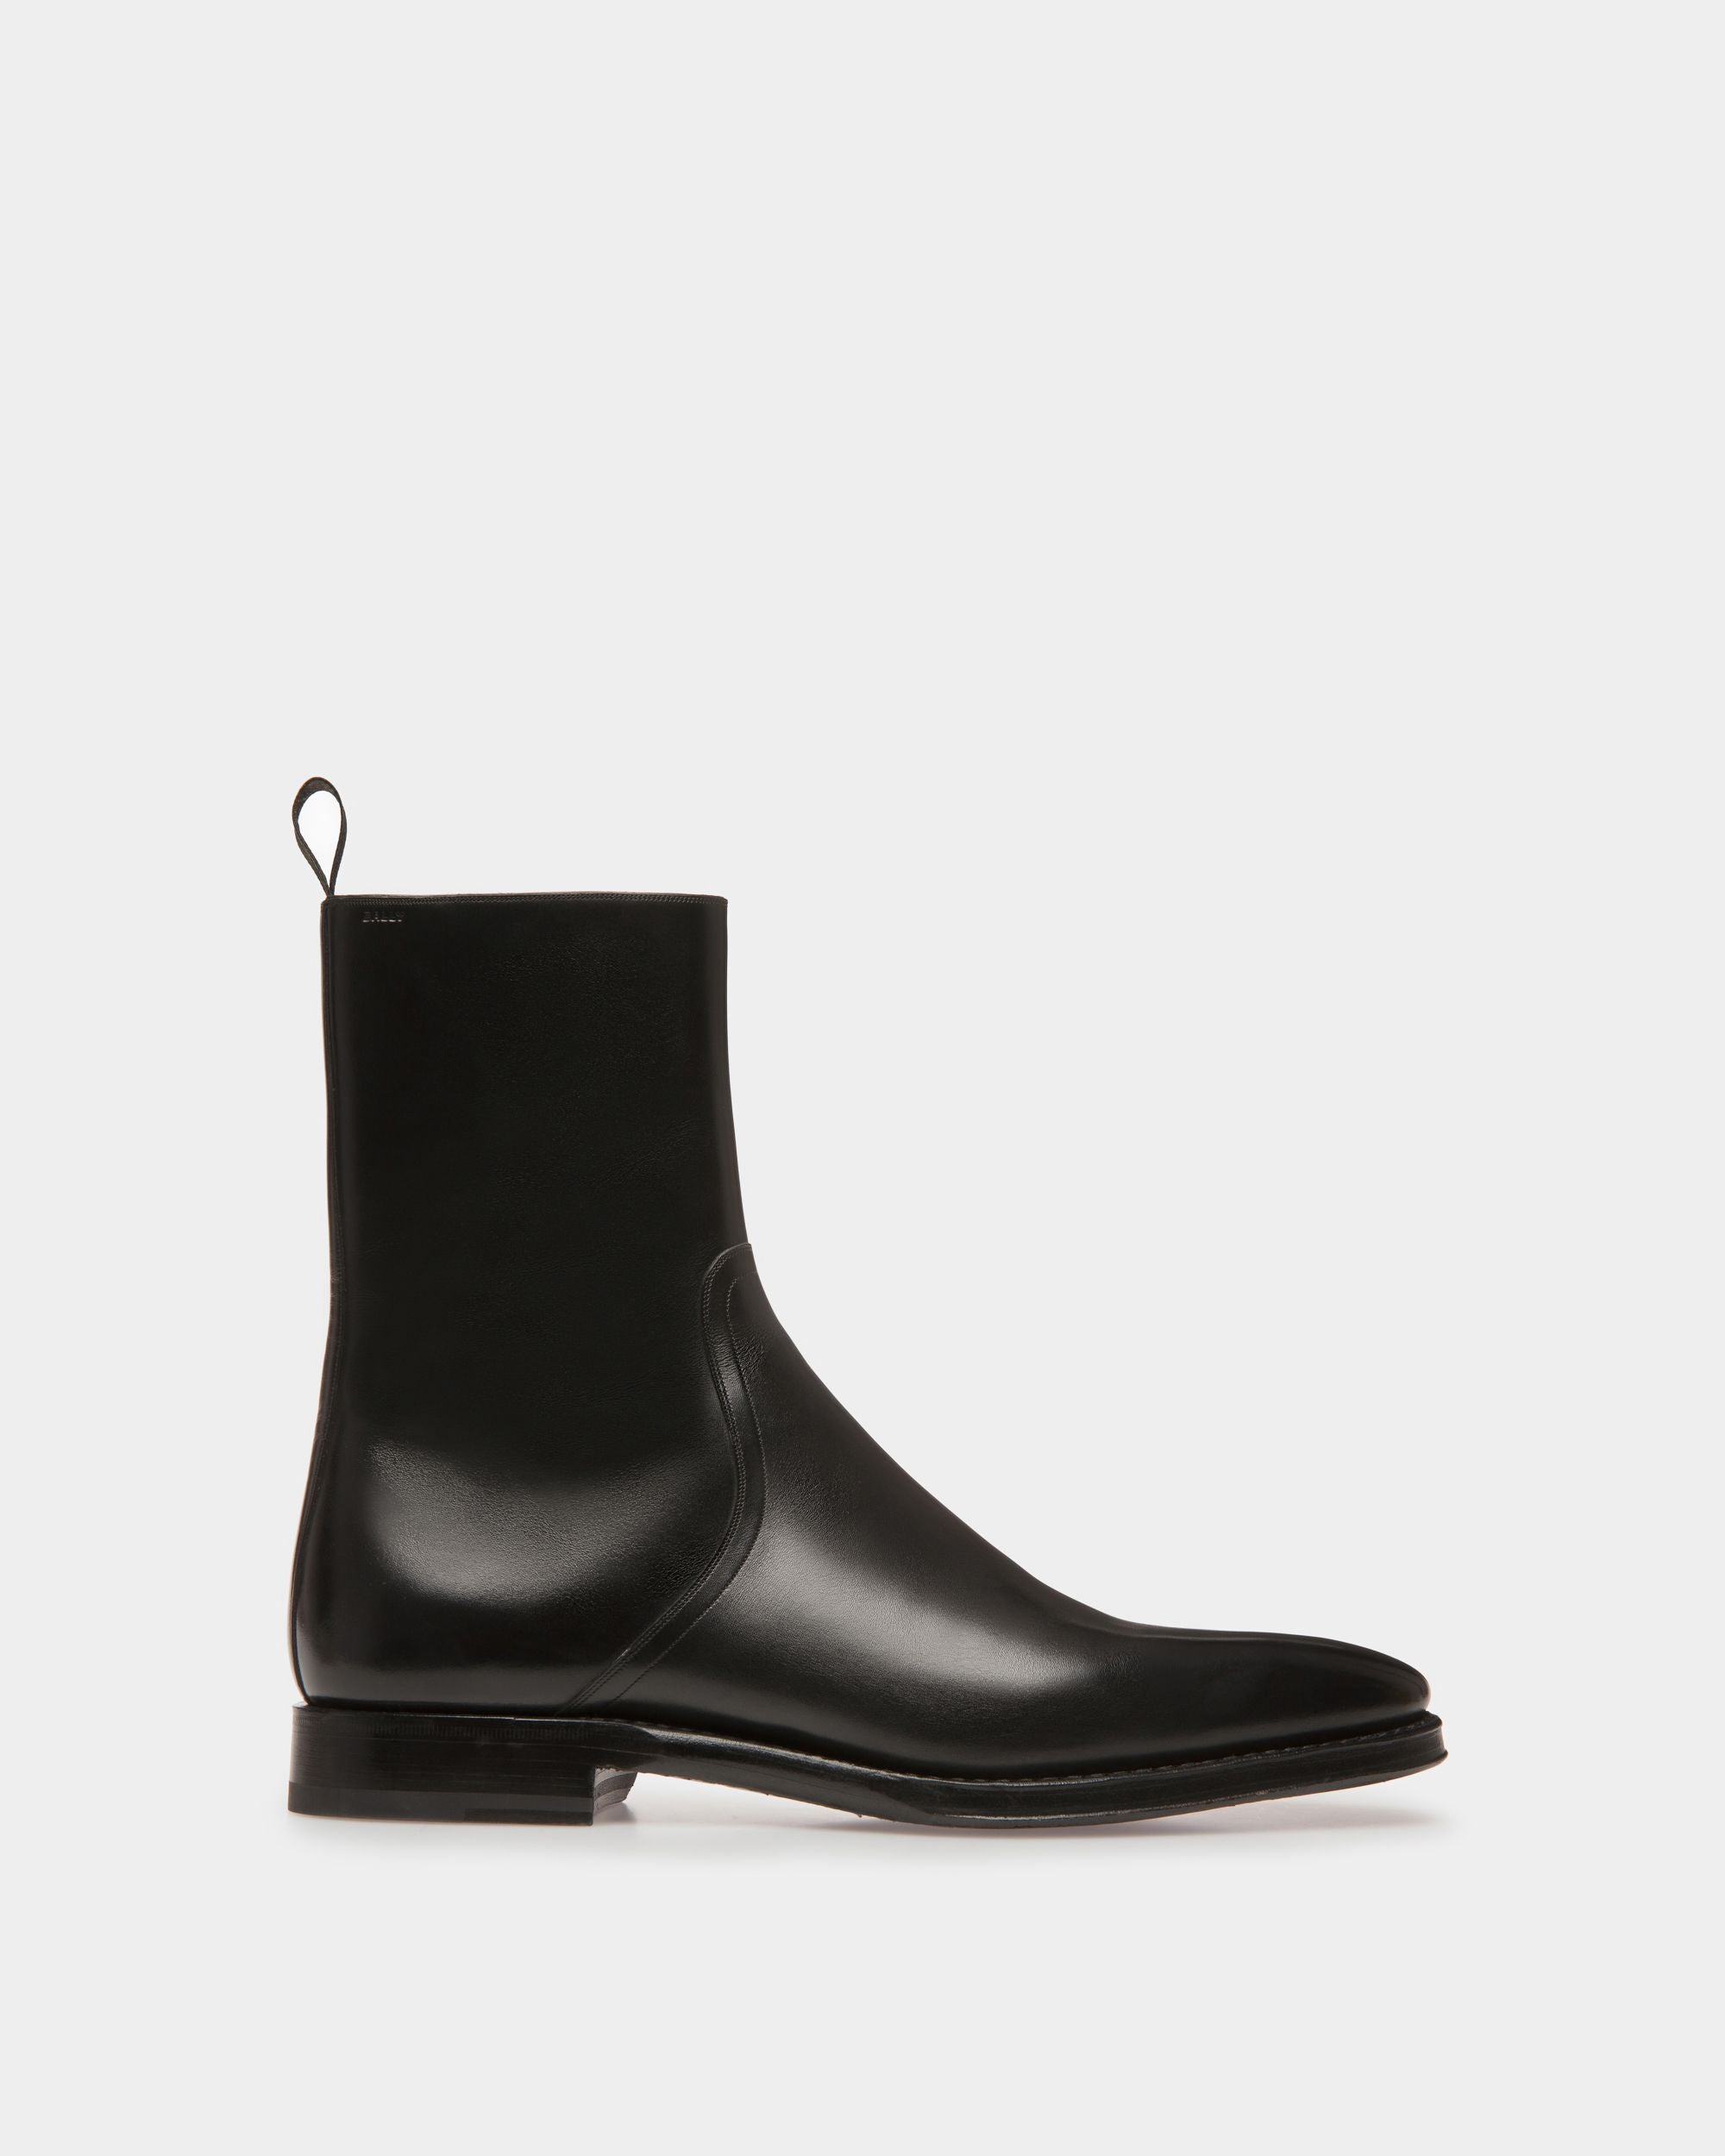 Saltron | Men's Boots | Black Leather | Bally | Still Life Side